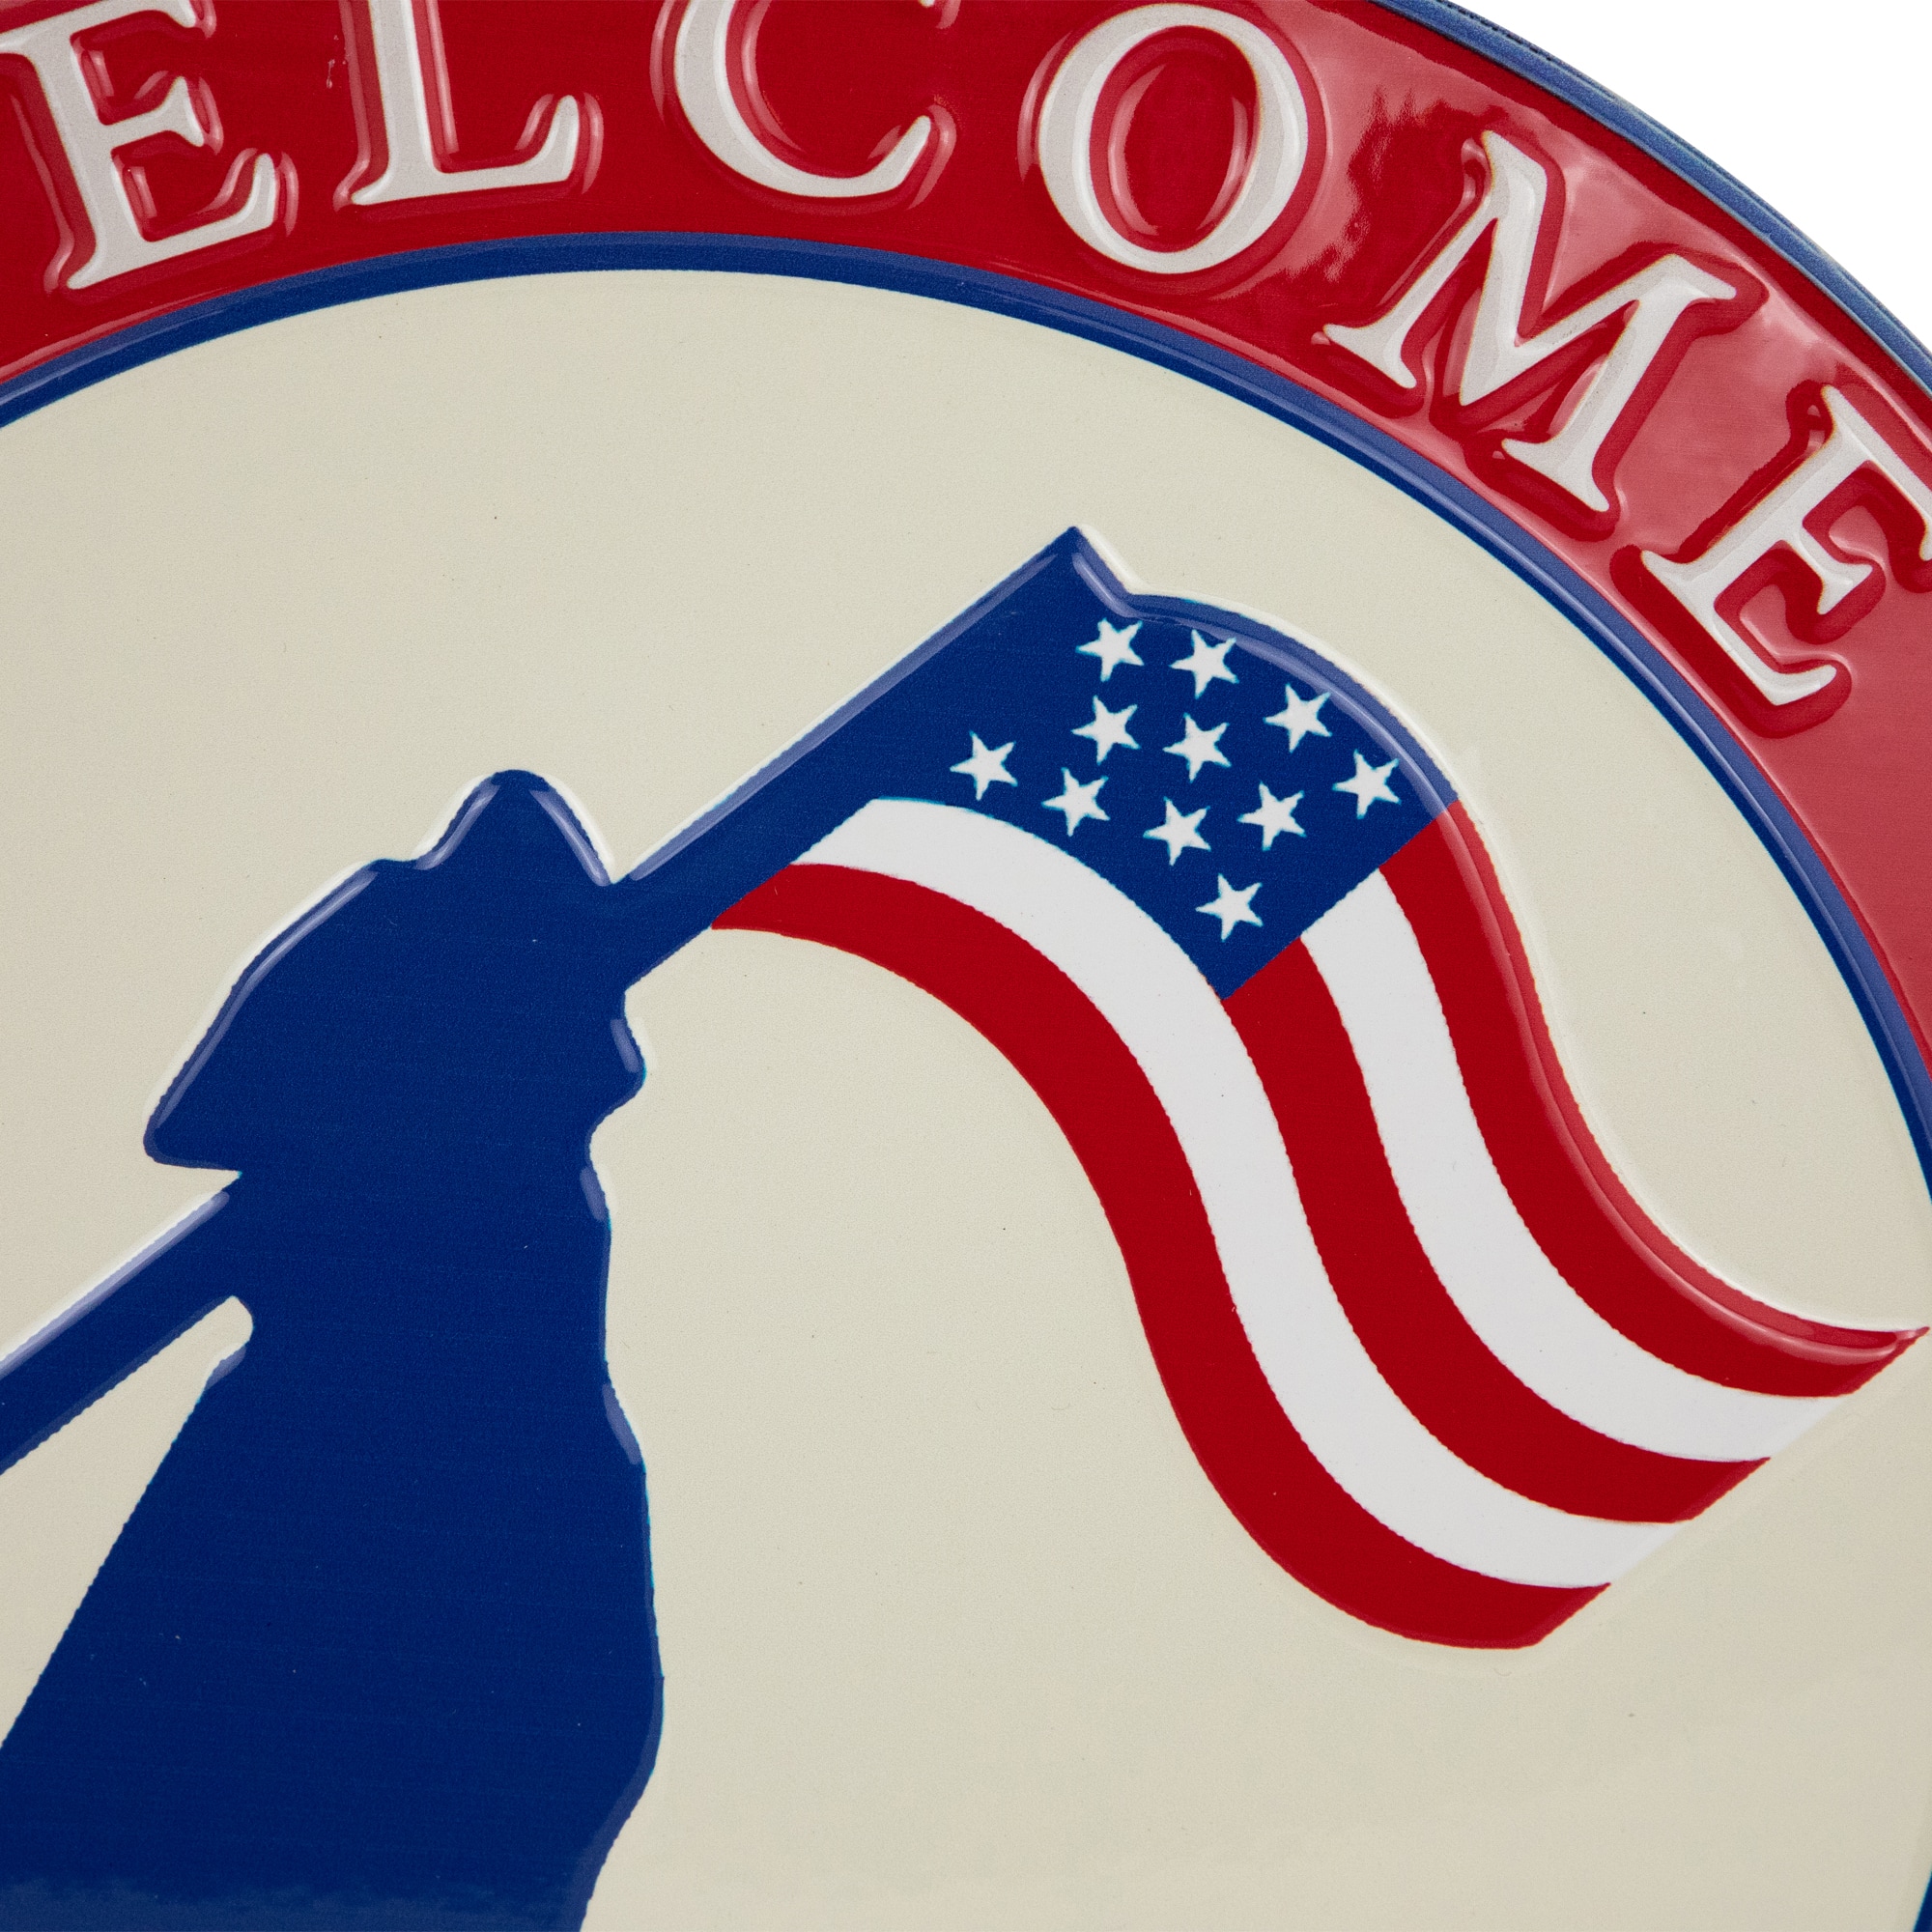 13.75&#x22; Welcome Friends &#x26; Family Patriotic Dog Metal Wall Sign